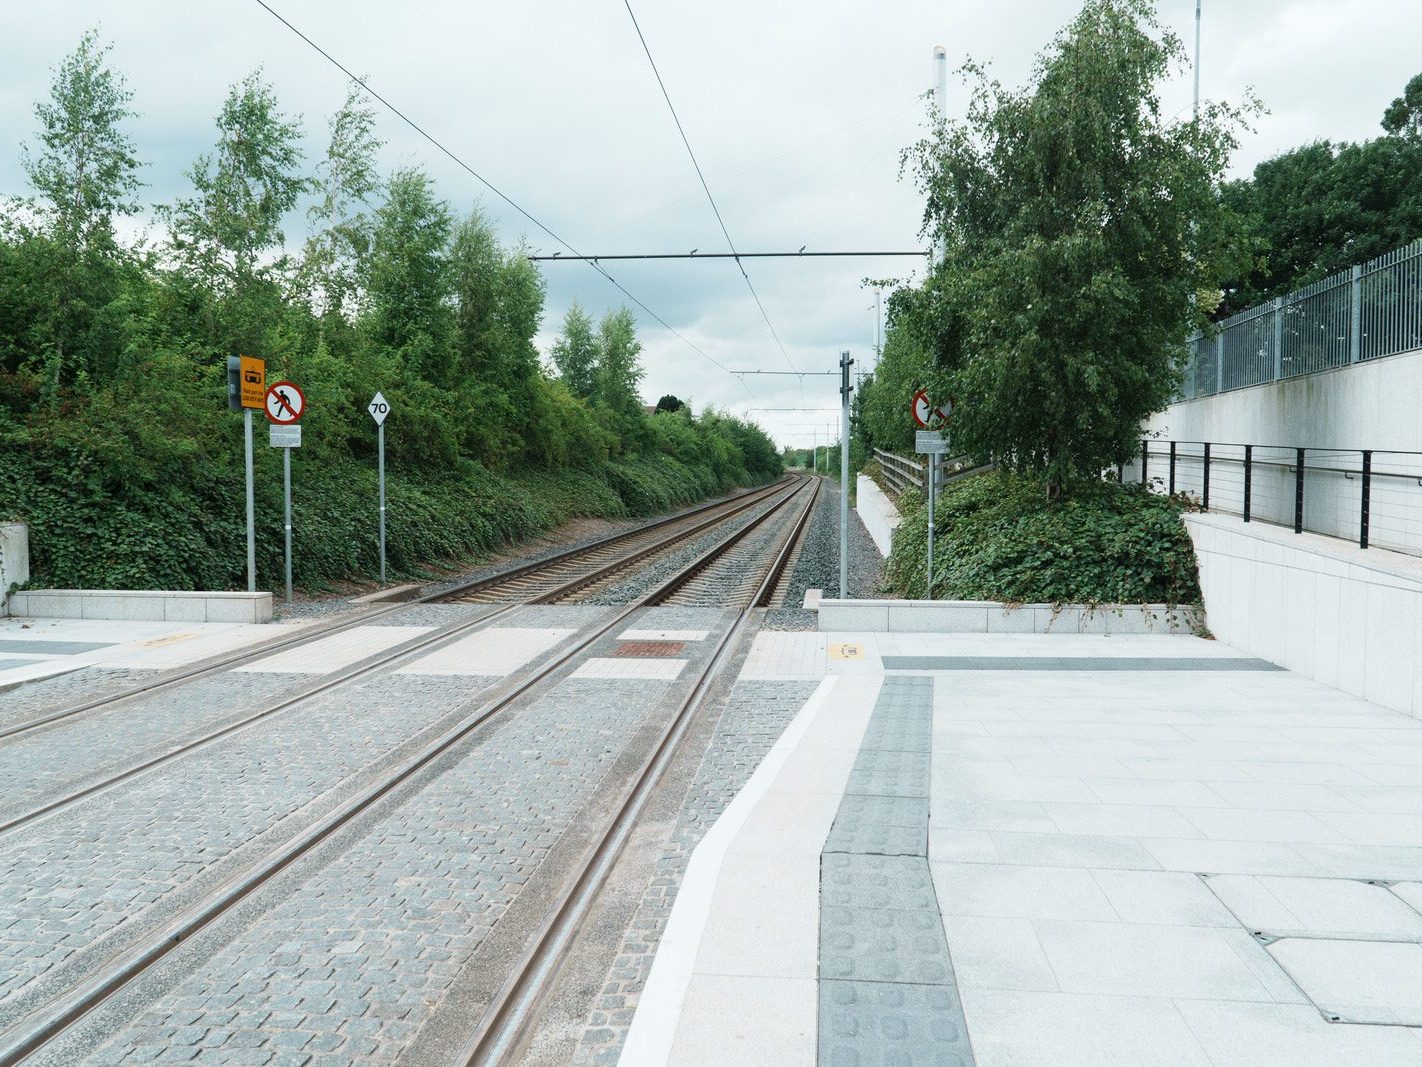 CABRA LUAS TRAM STOP ON CONNAUGHT STREET [GOOGLE BARD INCORRECTLY CLAIMED THAT THERE IS A PUBLIC TOILET AND A TICKET OFFICE] 017